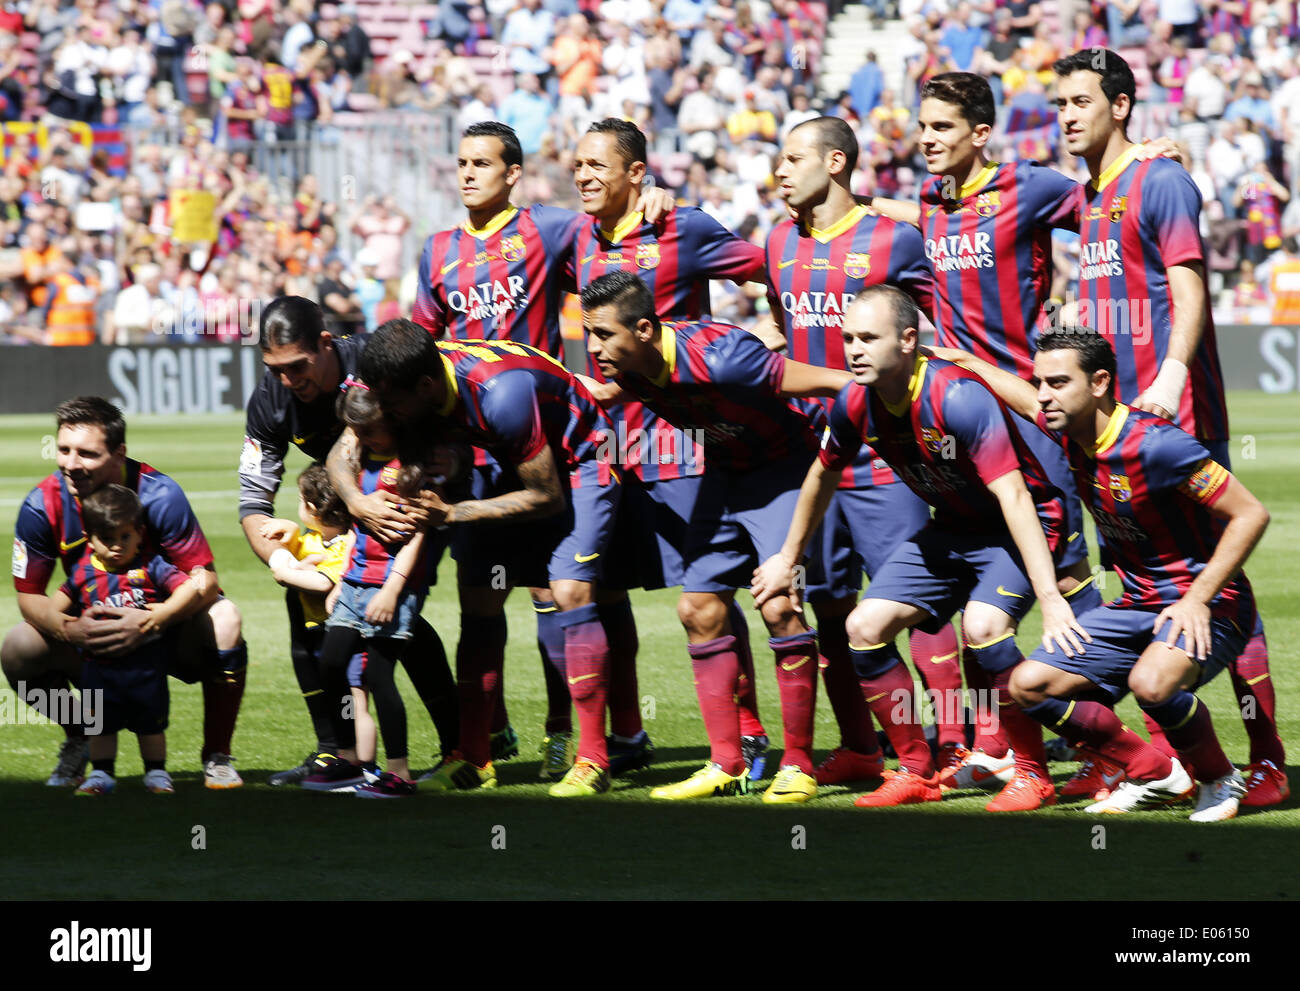 Barcelona, Spain. May 3, 2014 - FC Barcelona team with Messi with his son in the match between FC Barcelona and Getafe, for Week 36 of the spanish Liga BBVA played at the Camp Nou, May 3, 2014. Photo: Joan Valls/Urbanandsport/Nurphoto. (Credit Image: Credit:  Joan Valls/NurPhoto/ZUMAPRESS.com/Alamy Live News) Stock Photo